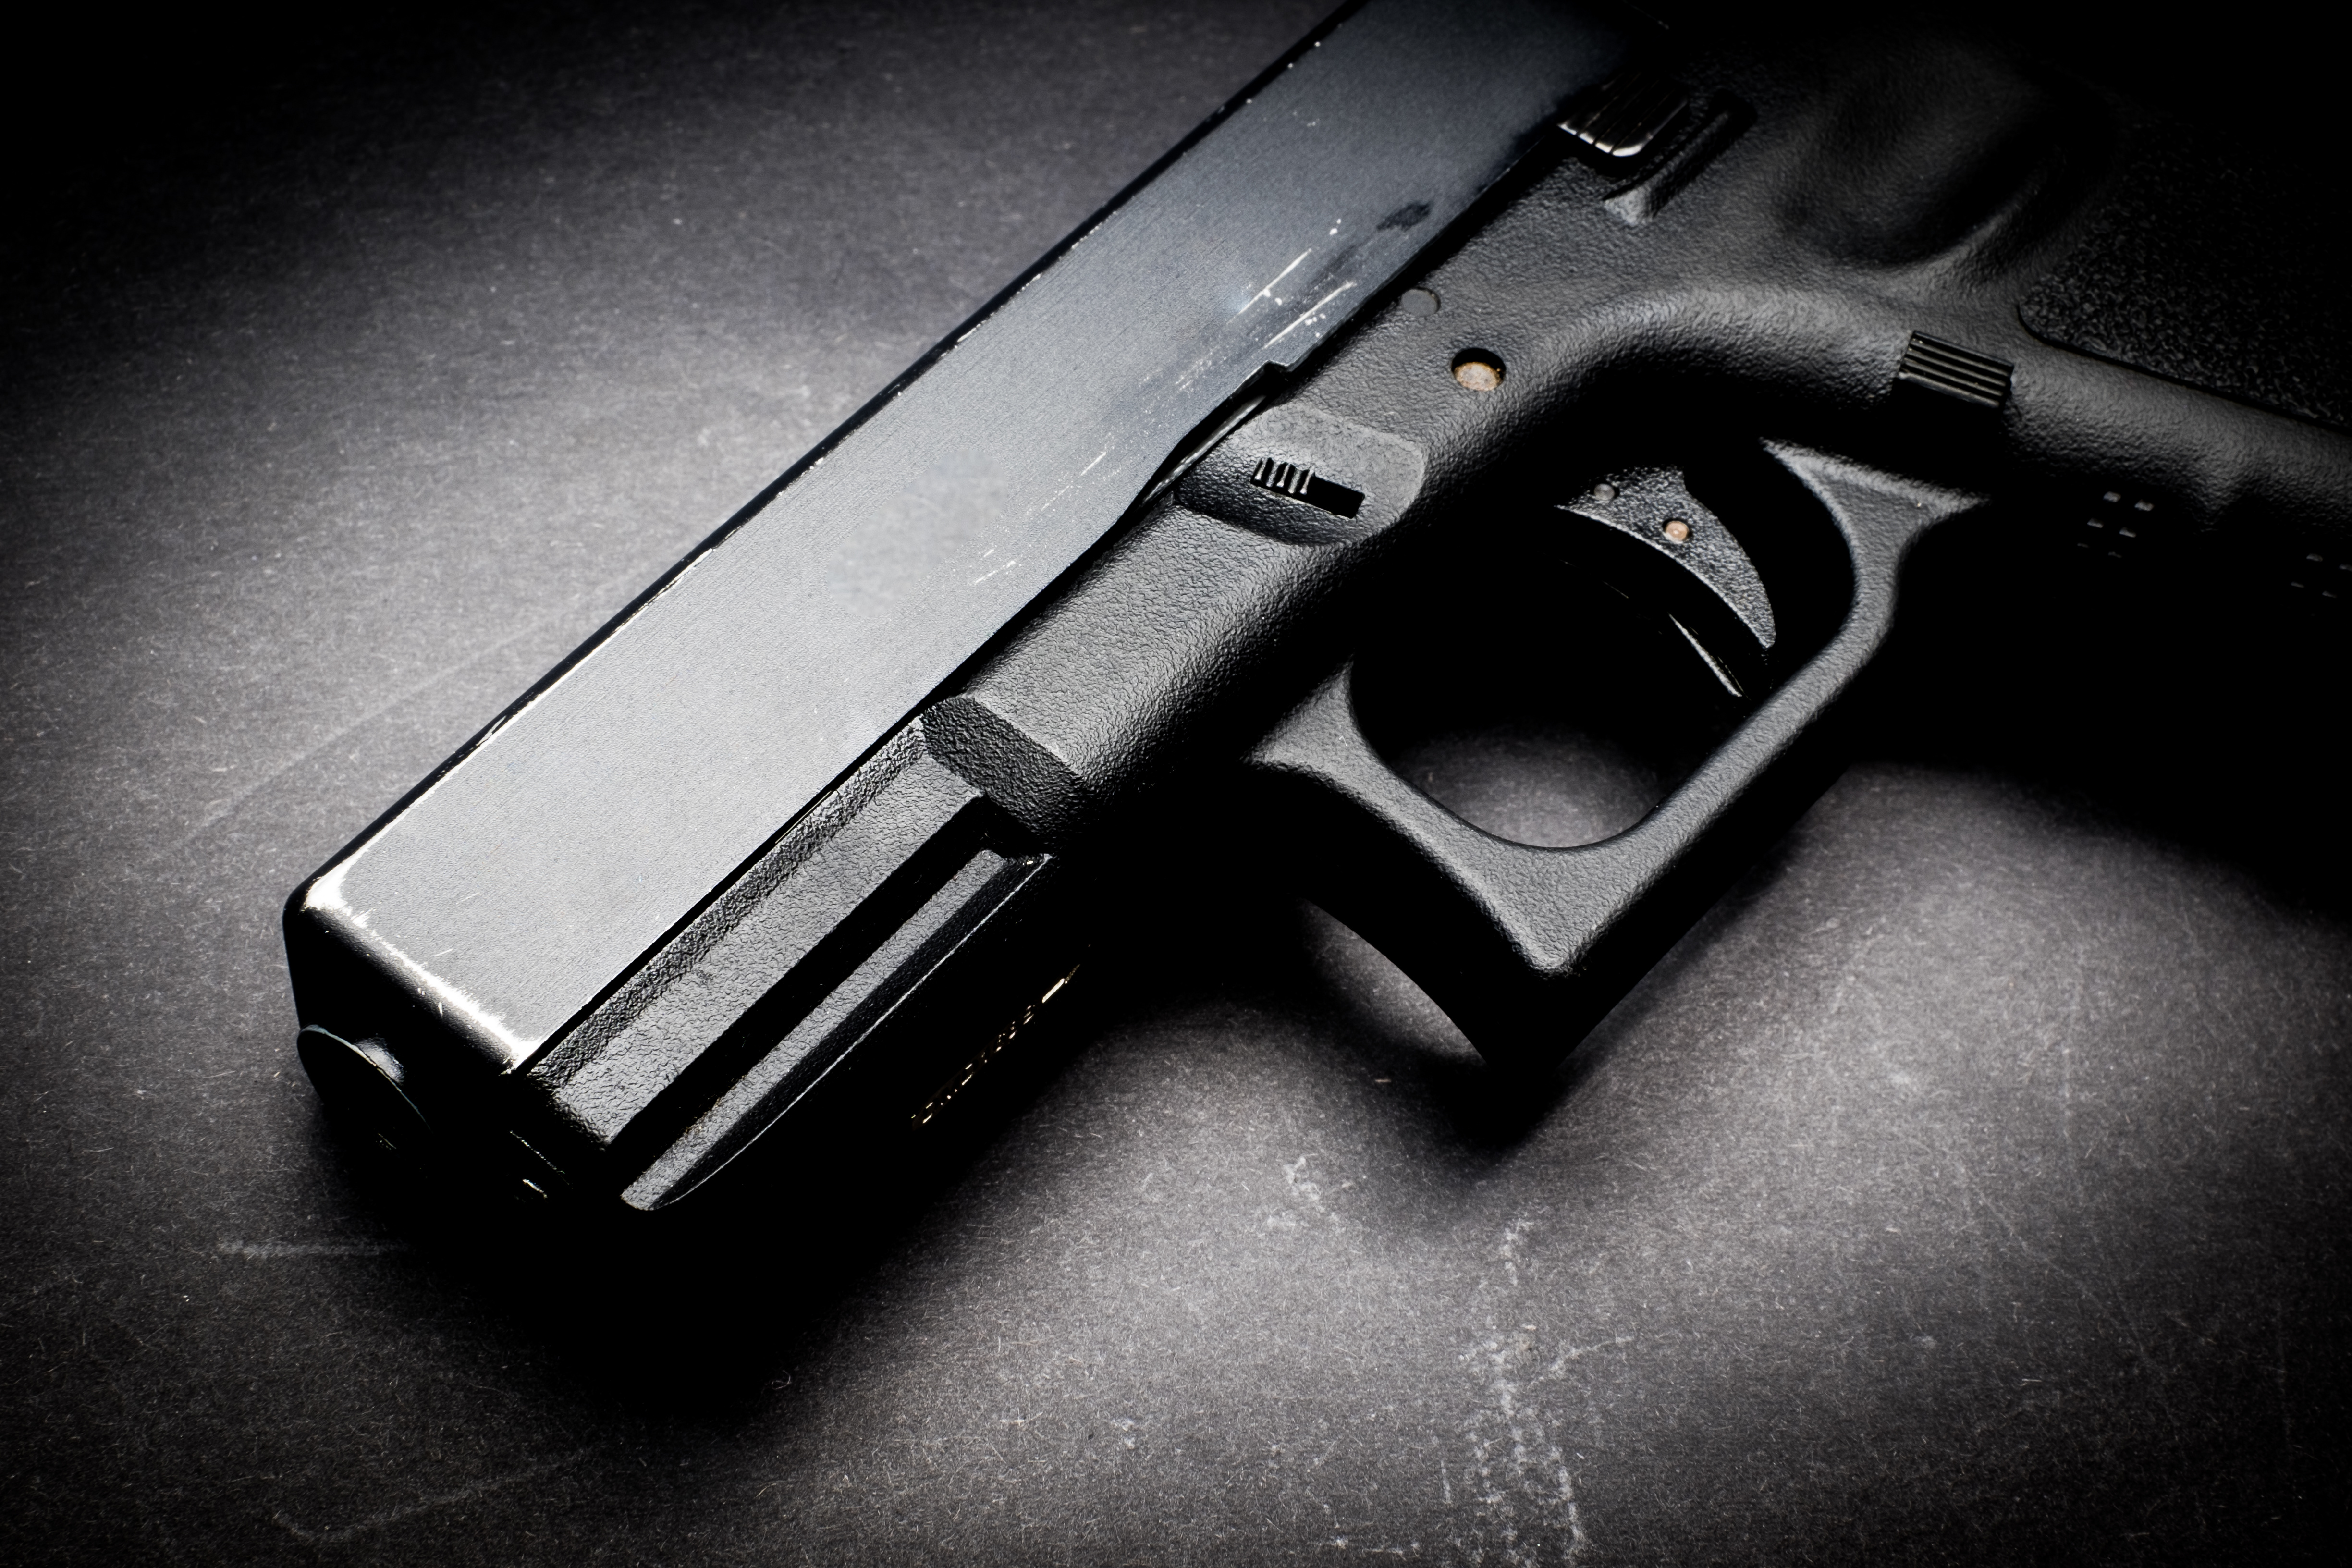 Gun Injury Law: As Foreseeability Expands, The Opportunity to Help the Injured Increases